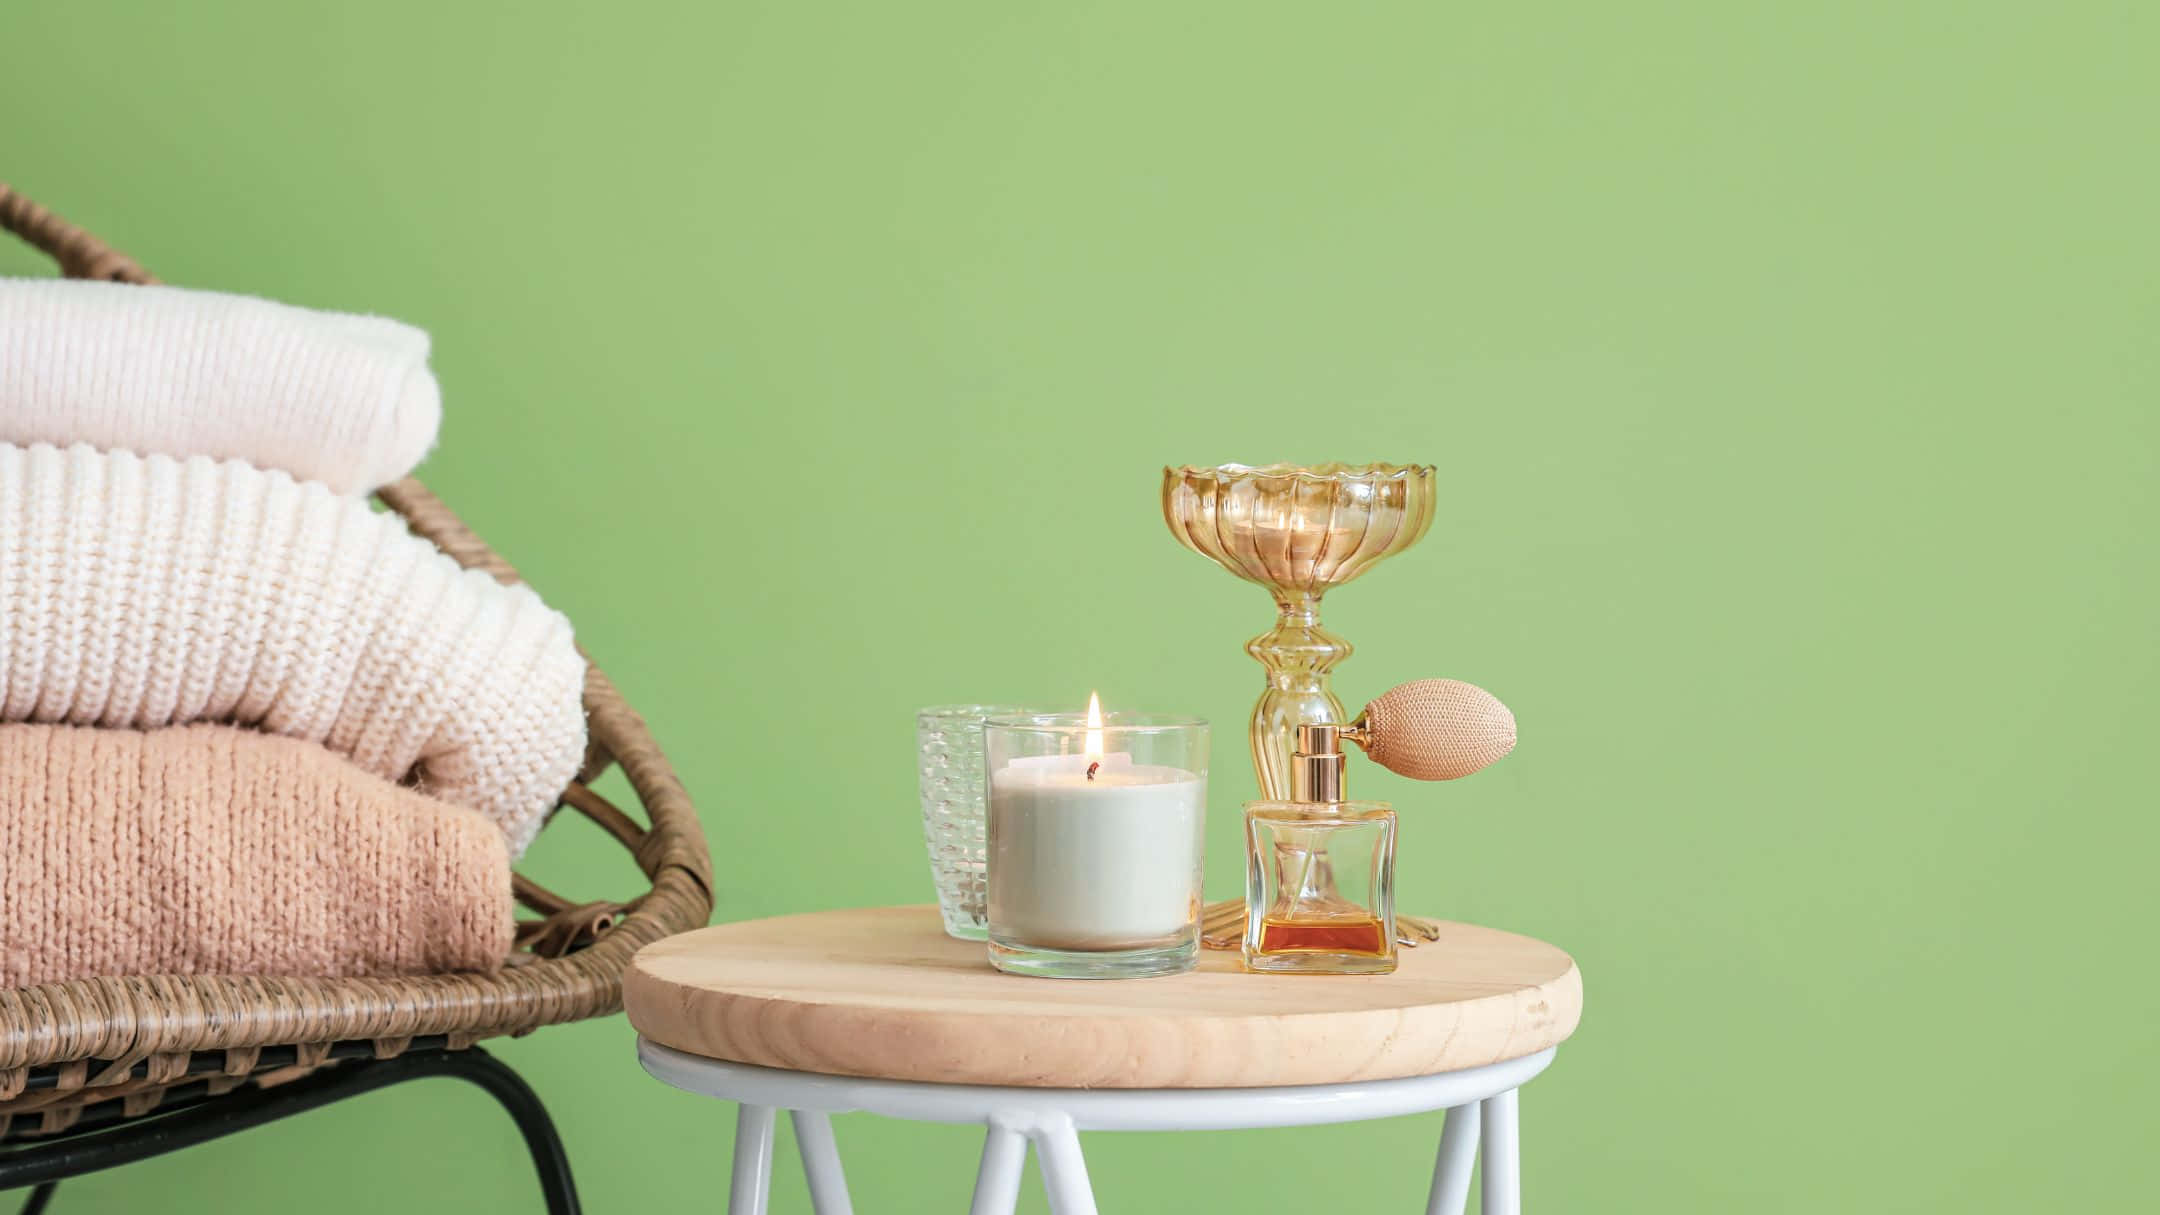 A Wooden Stool With A Candle And A Candlestick